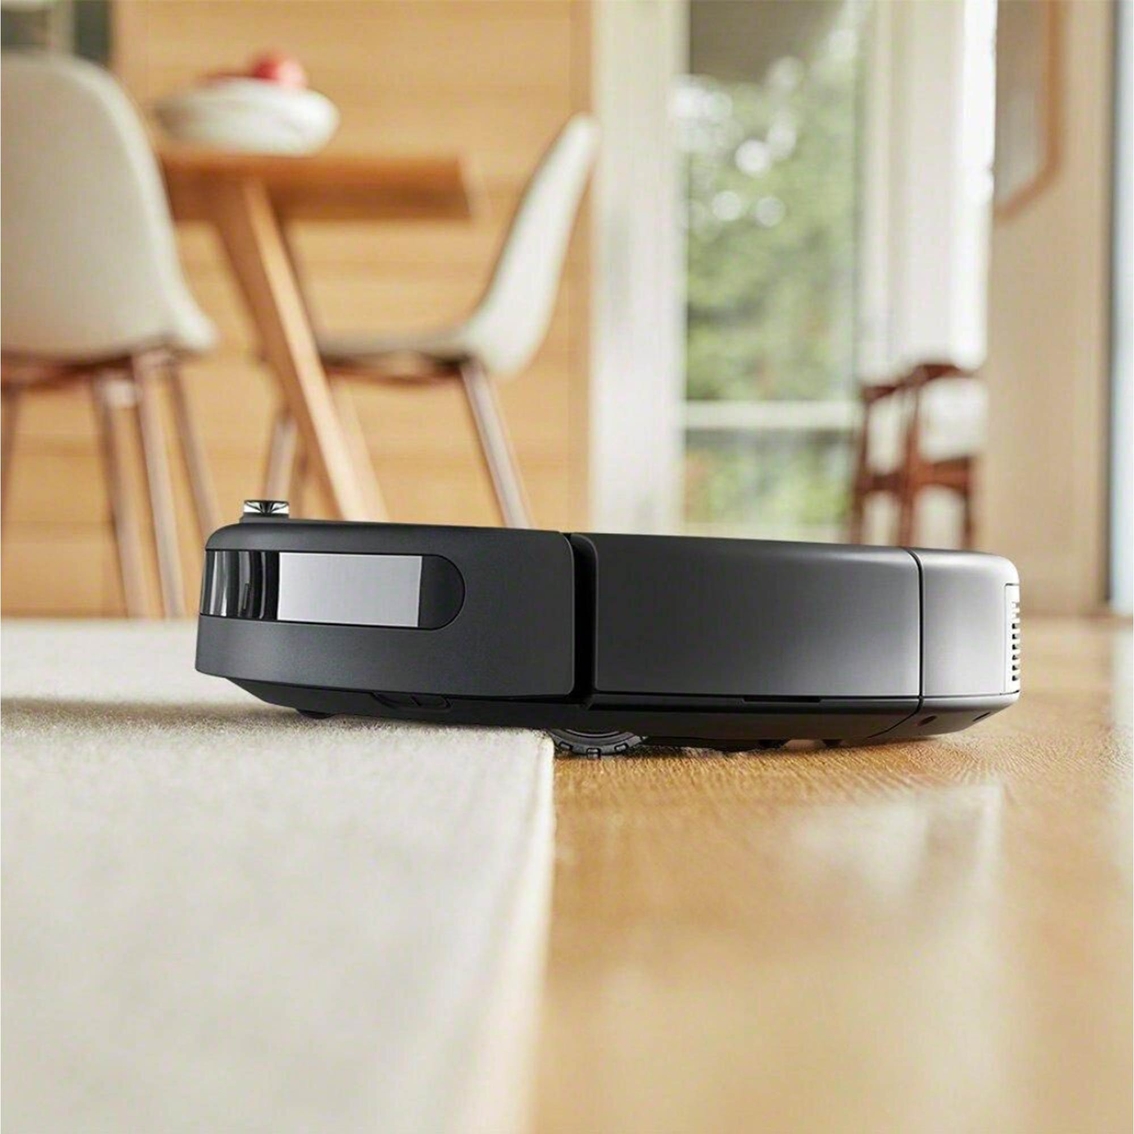 iRobot Roomba 694 Wi-Fi Connected Robot Vacuum - Image 4 of 5